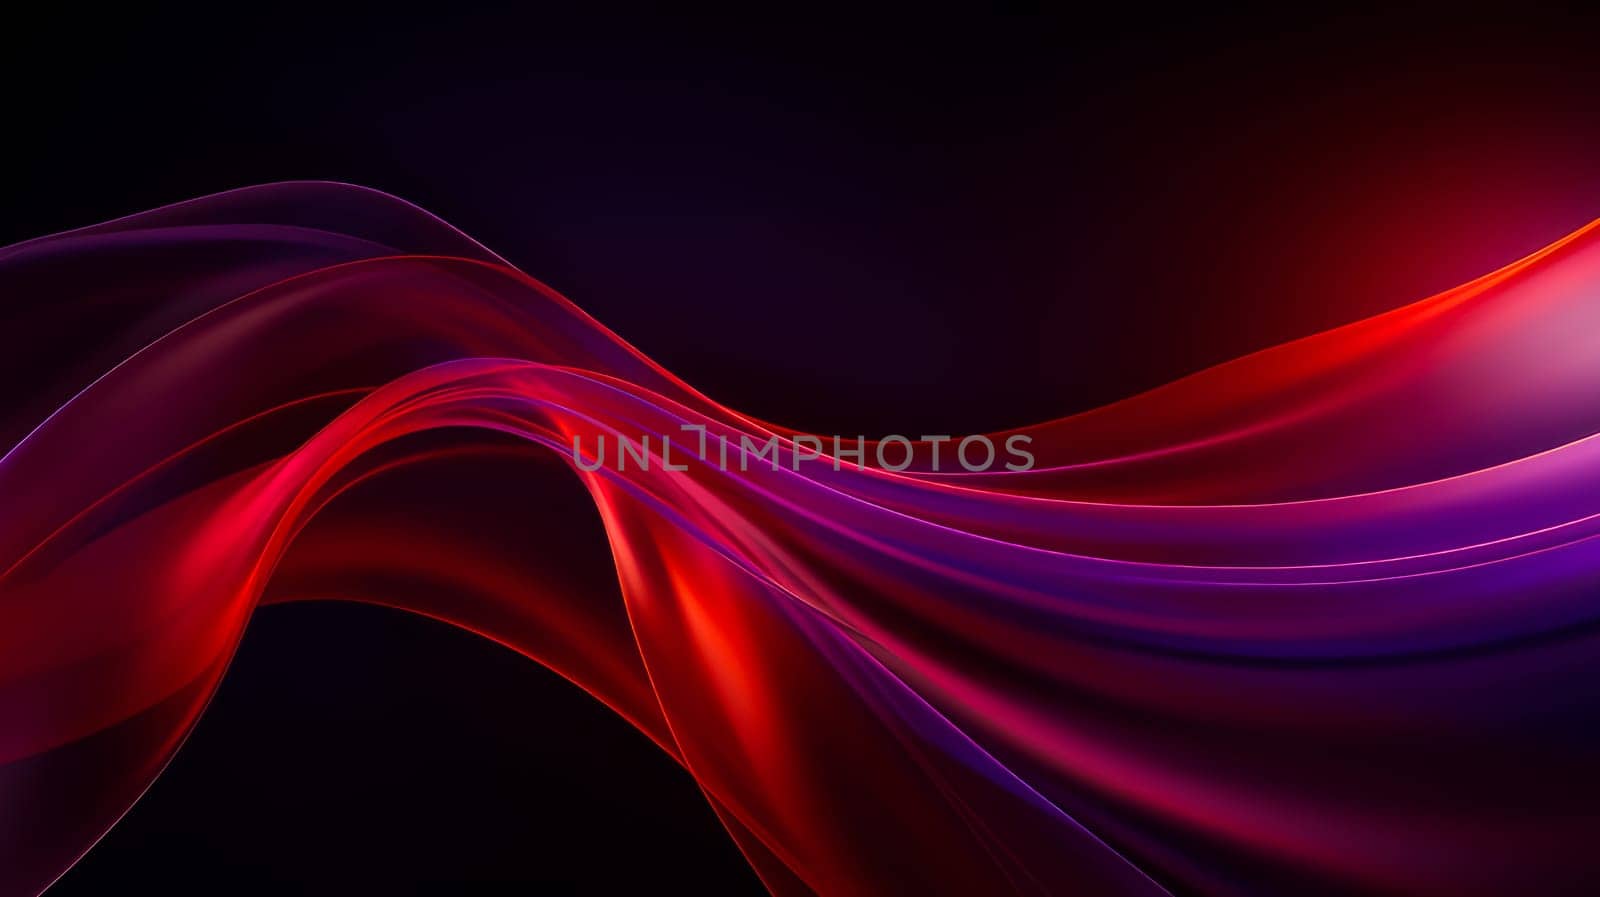 Beautiful luxury 3D modern abstract neon red purple background composed of waves with light digital effect in futuristic style